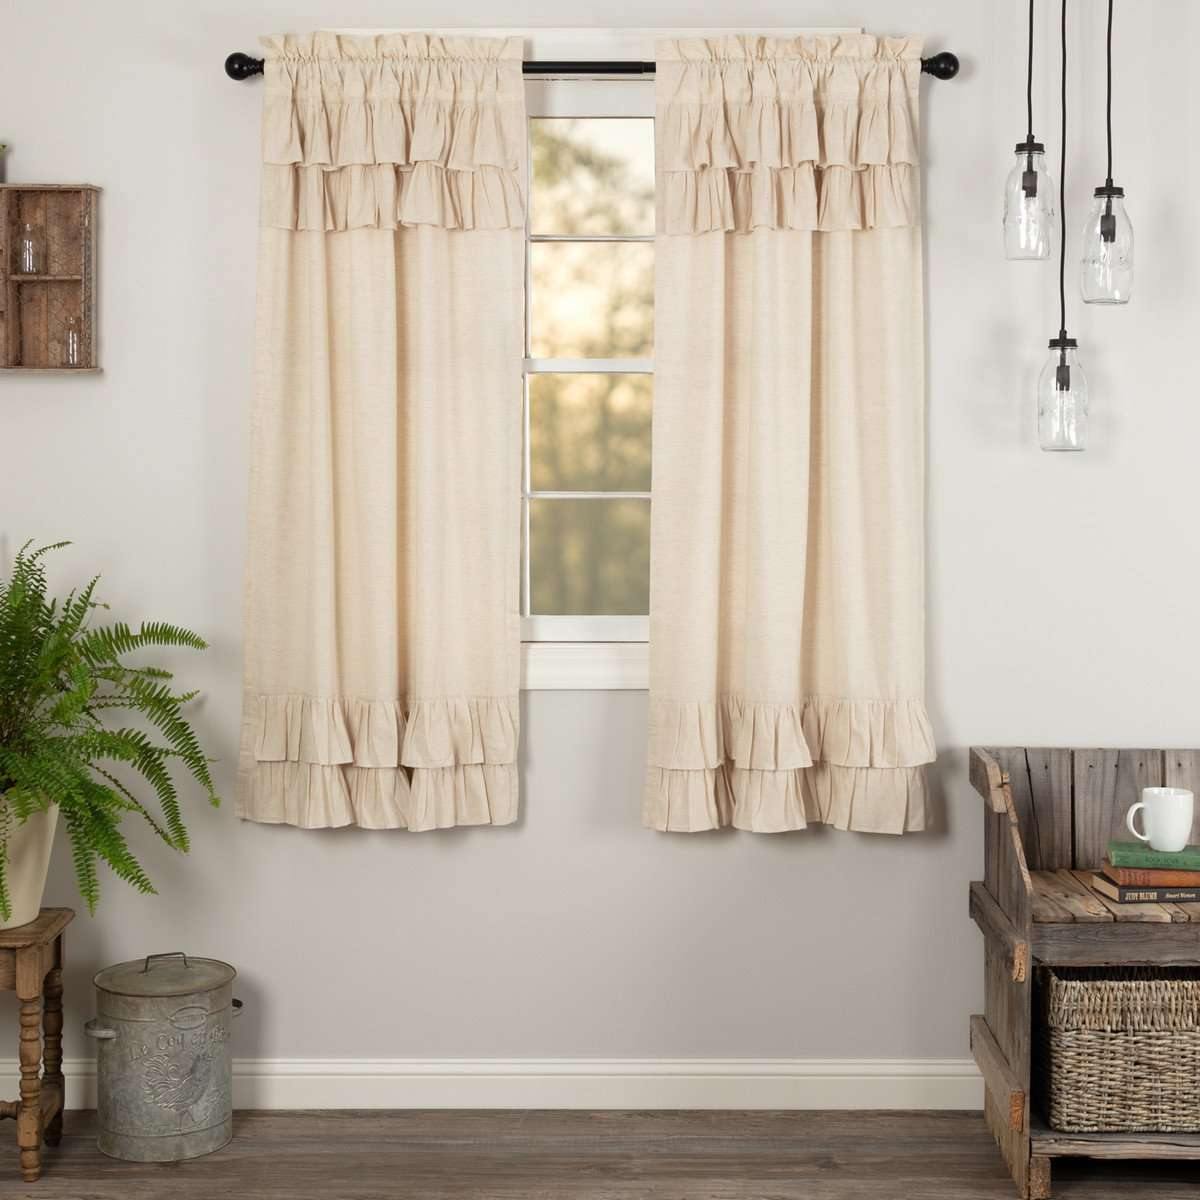 Simple Life Flax Natural Ruffled Short Panel Curtain Set of 2 63x36 VHC Brands - The Fox Decor